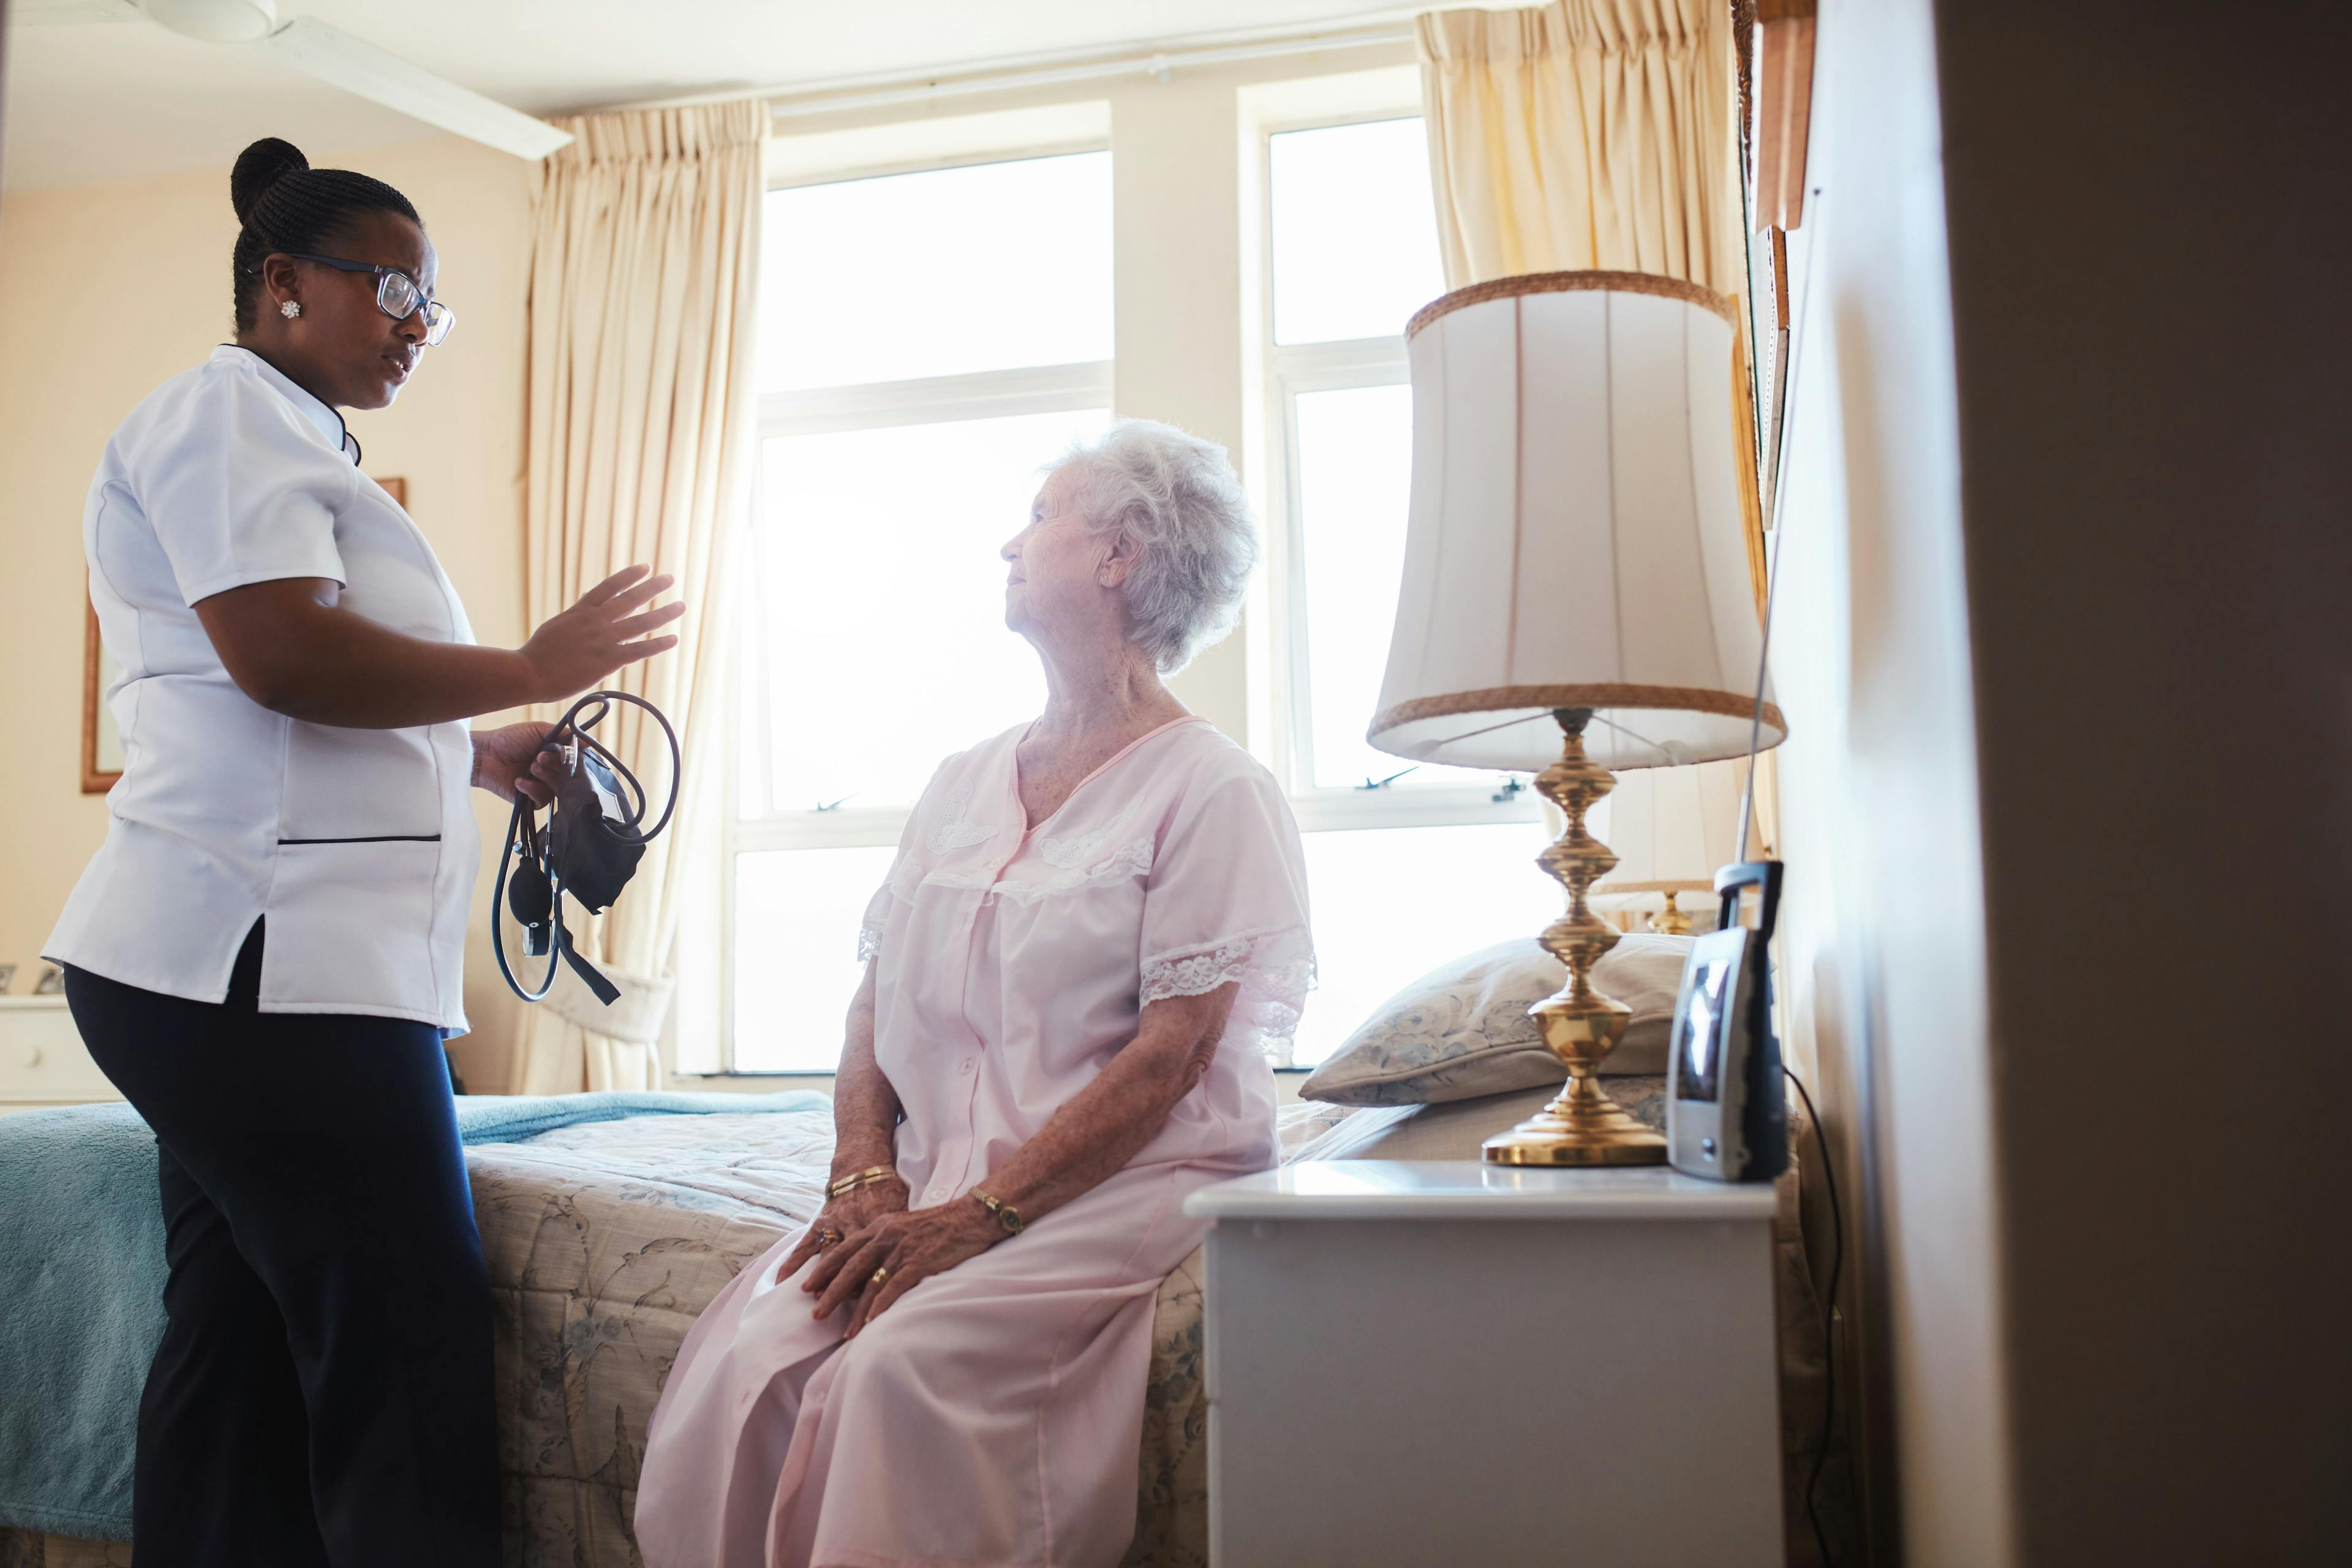 Expanding hospital at home care: Modeling a financially sustainable program | Tina Burbine 